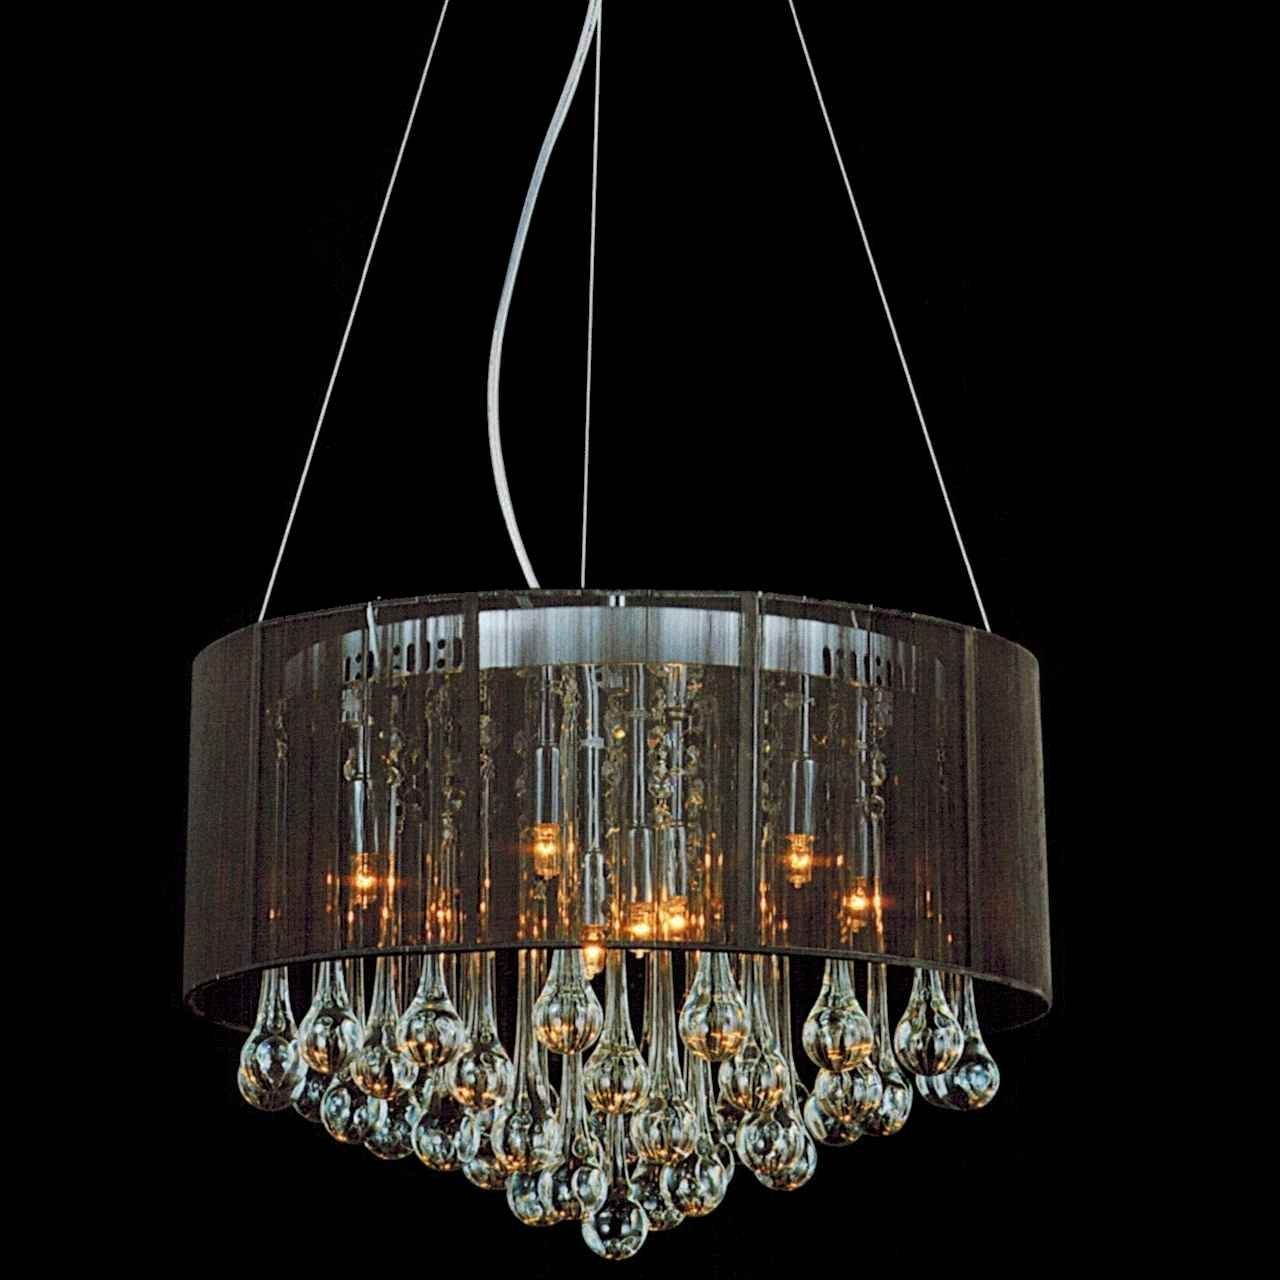 Innovative Black And Silver Chandelier Chandelier With Black With Crystal Chandeliers With Shades (View 14 of 25)